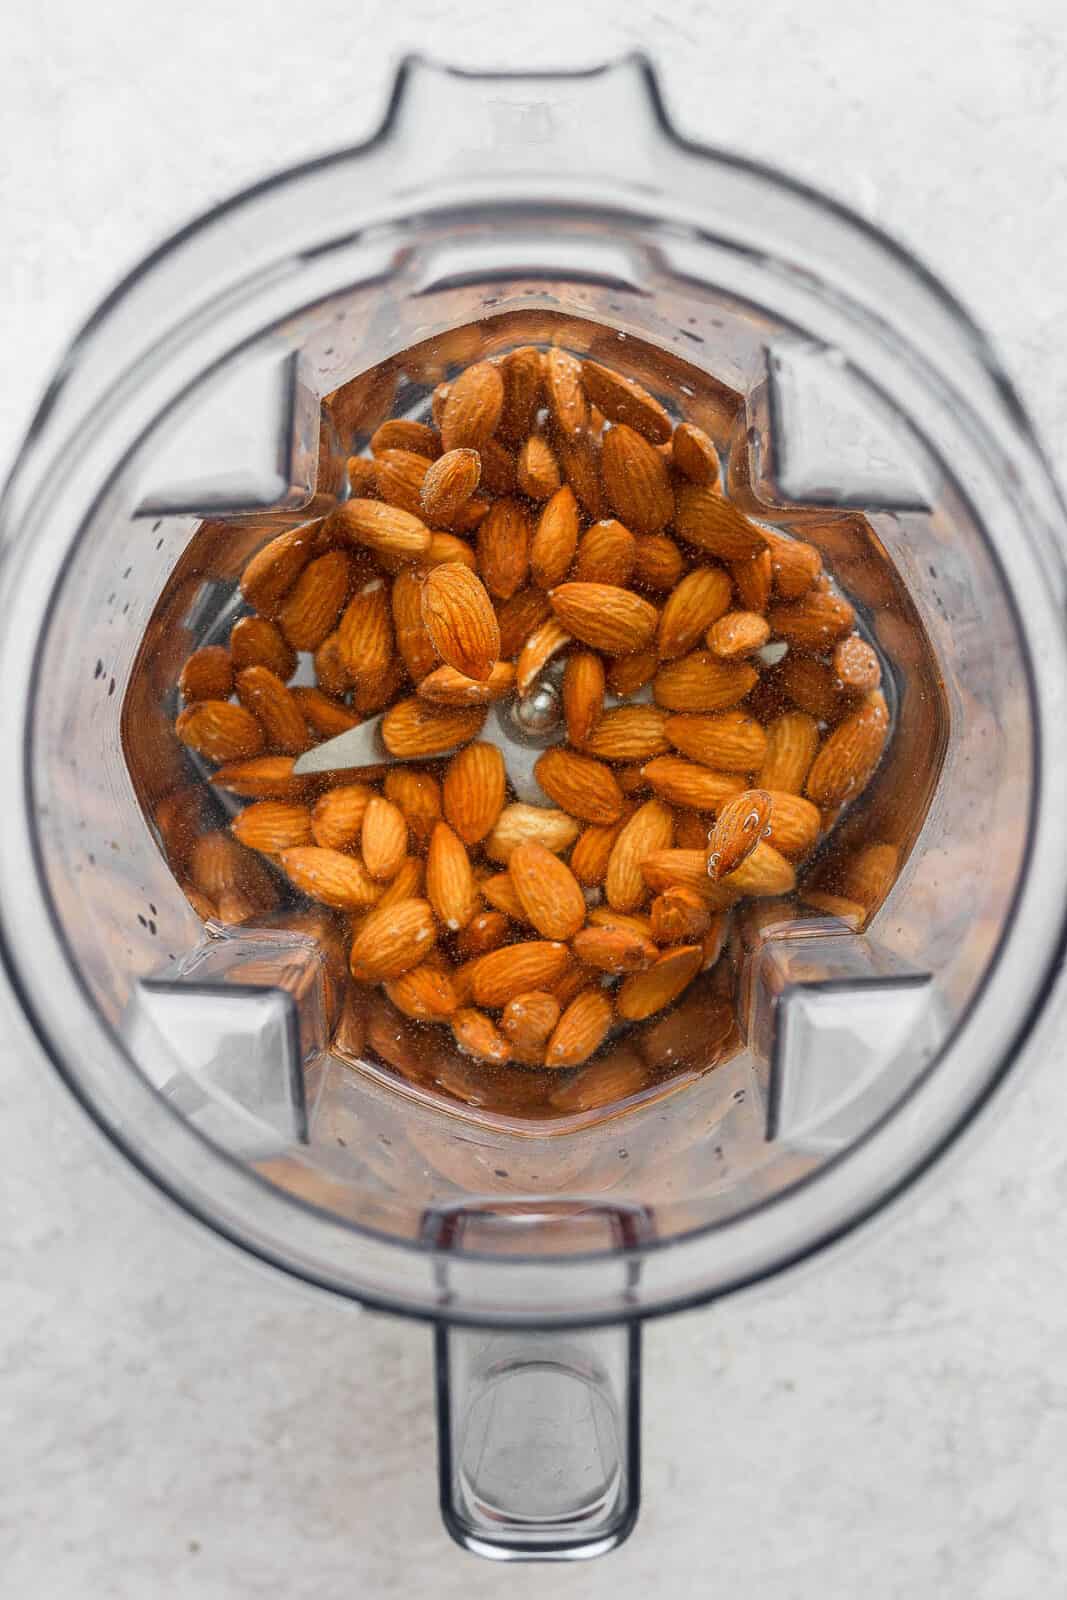 Raw almonds in a blender with water.